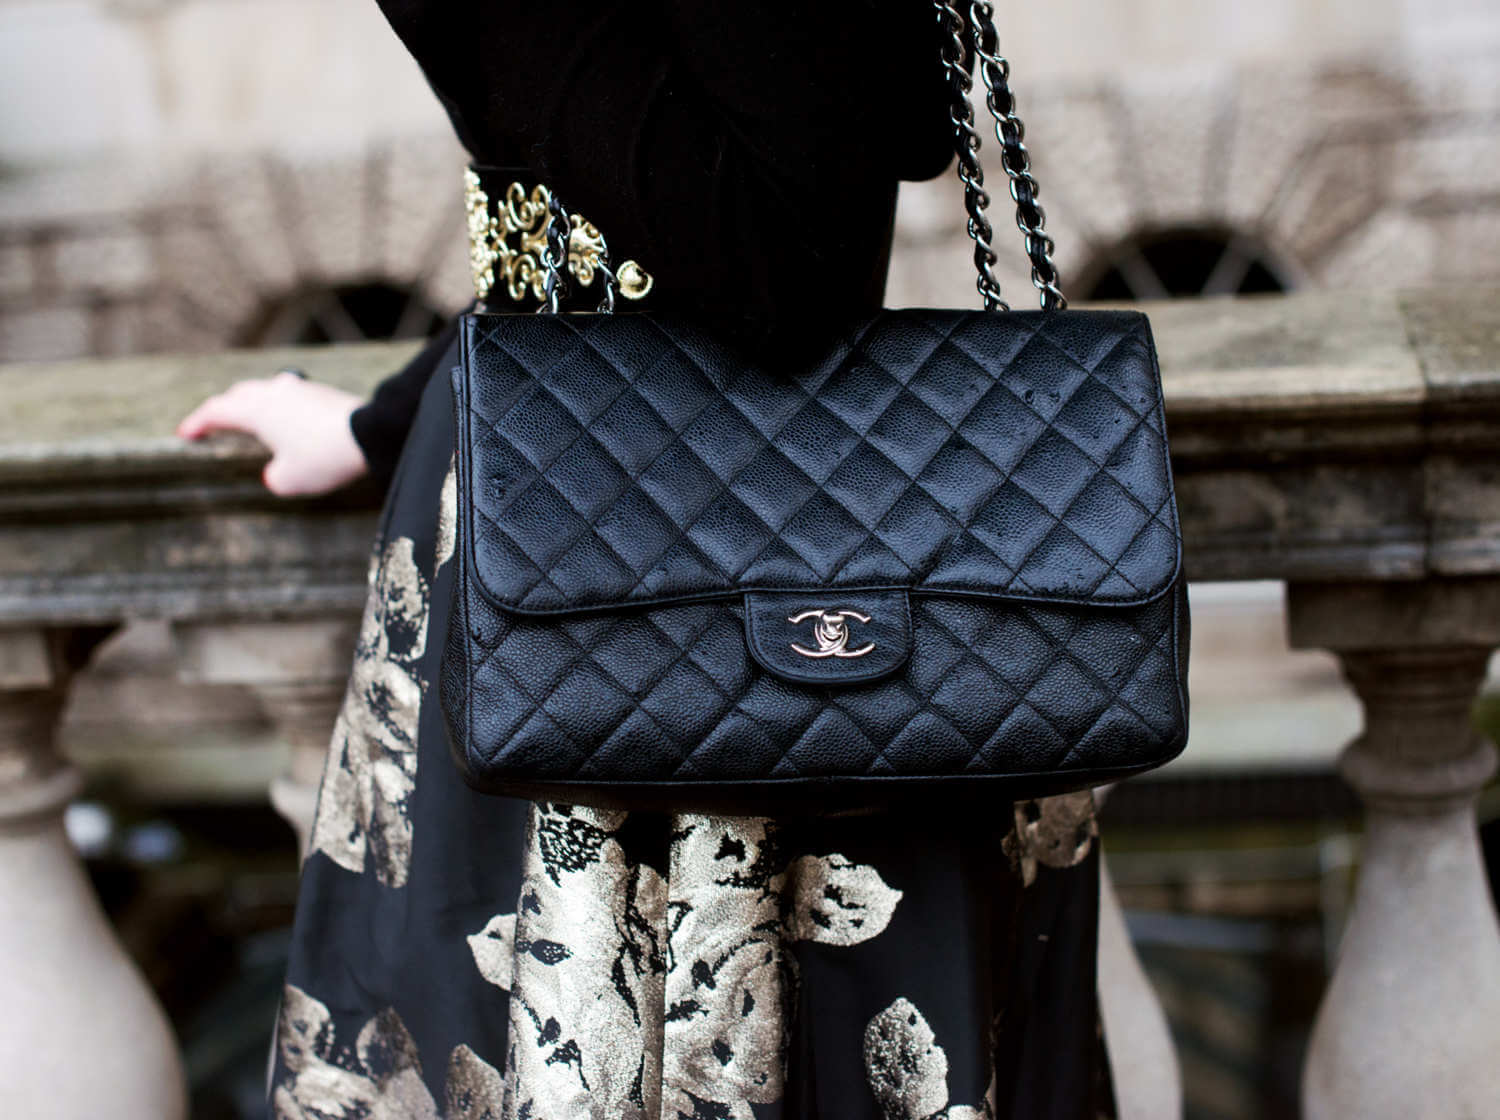 Best Handbag Brands in the World - 8th Is Most Expensive Brand - Live Enhanced